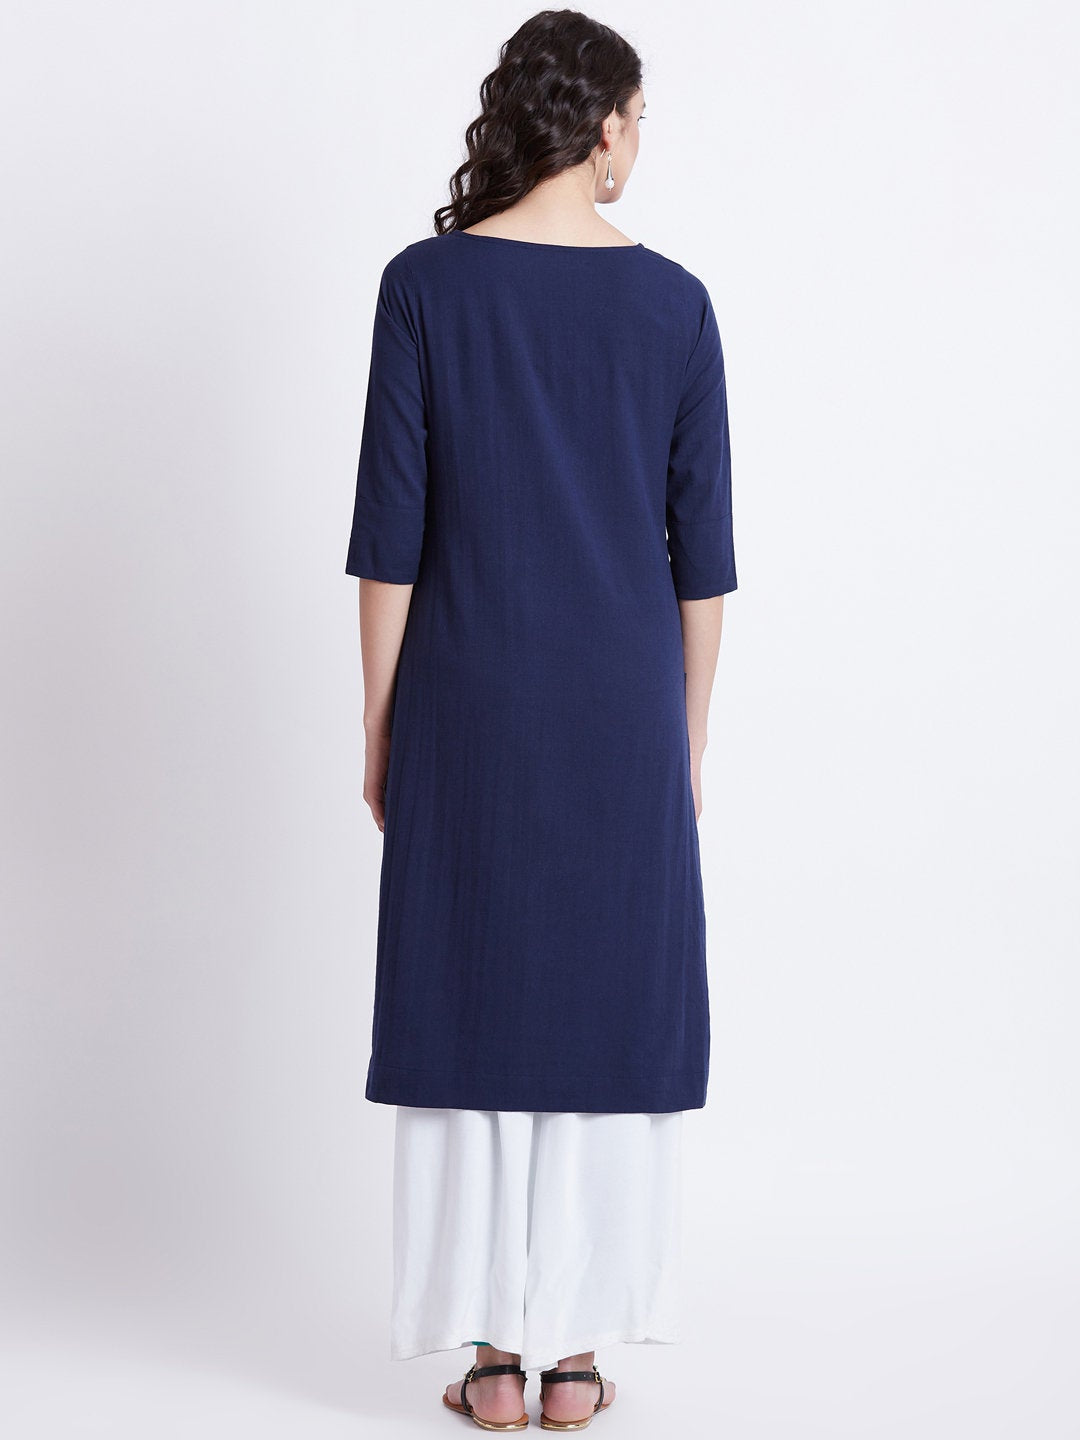 Indian ethnic long kurta with pockets in blue colour with embroidery detailing on yoke